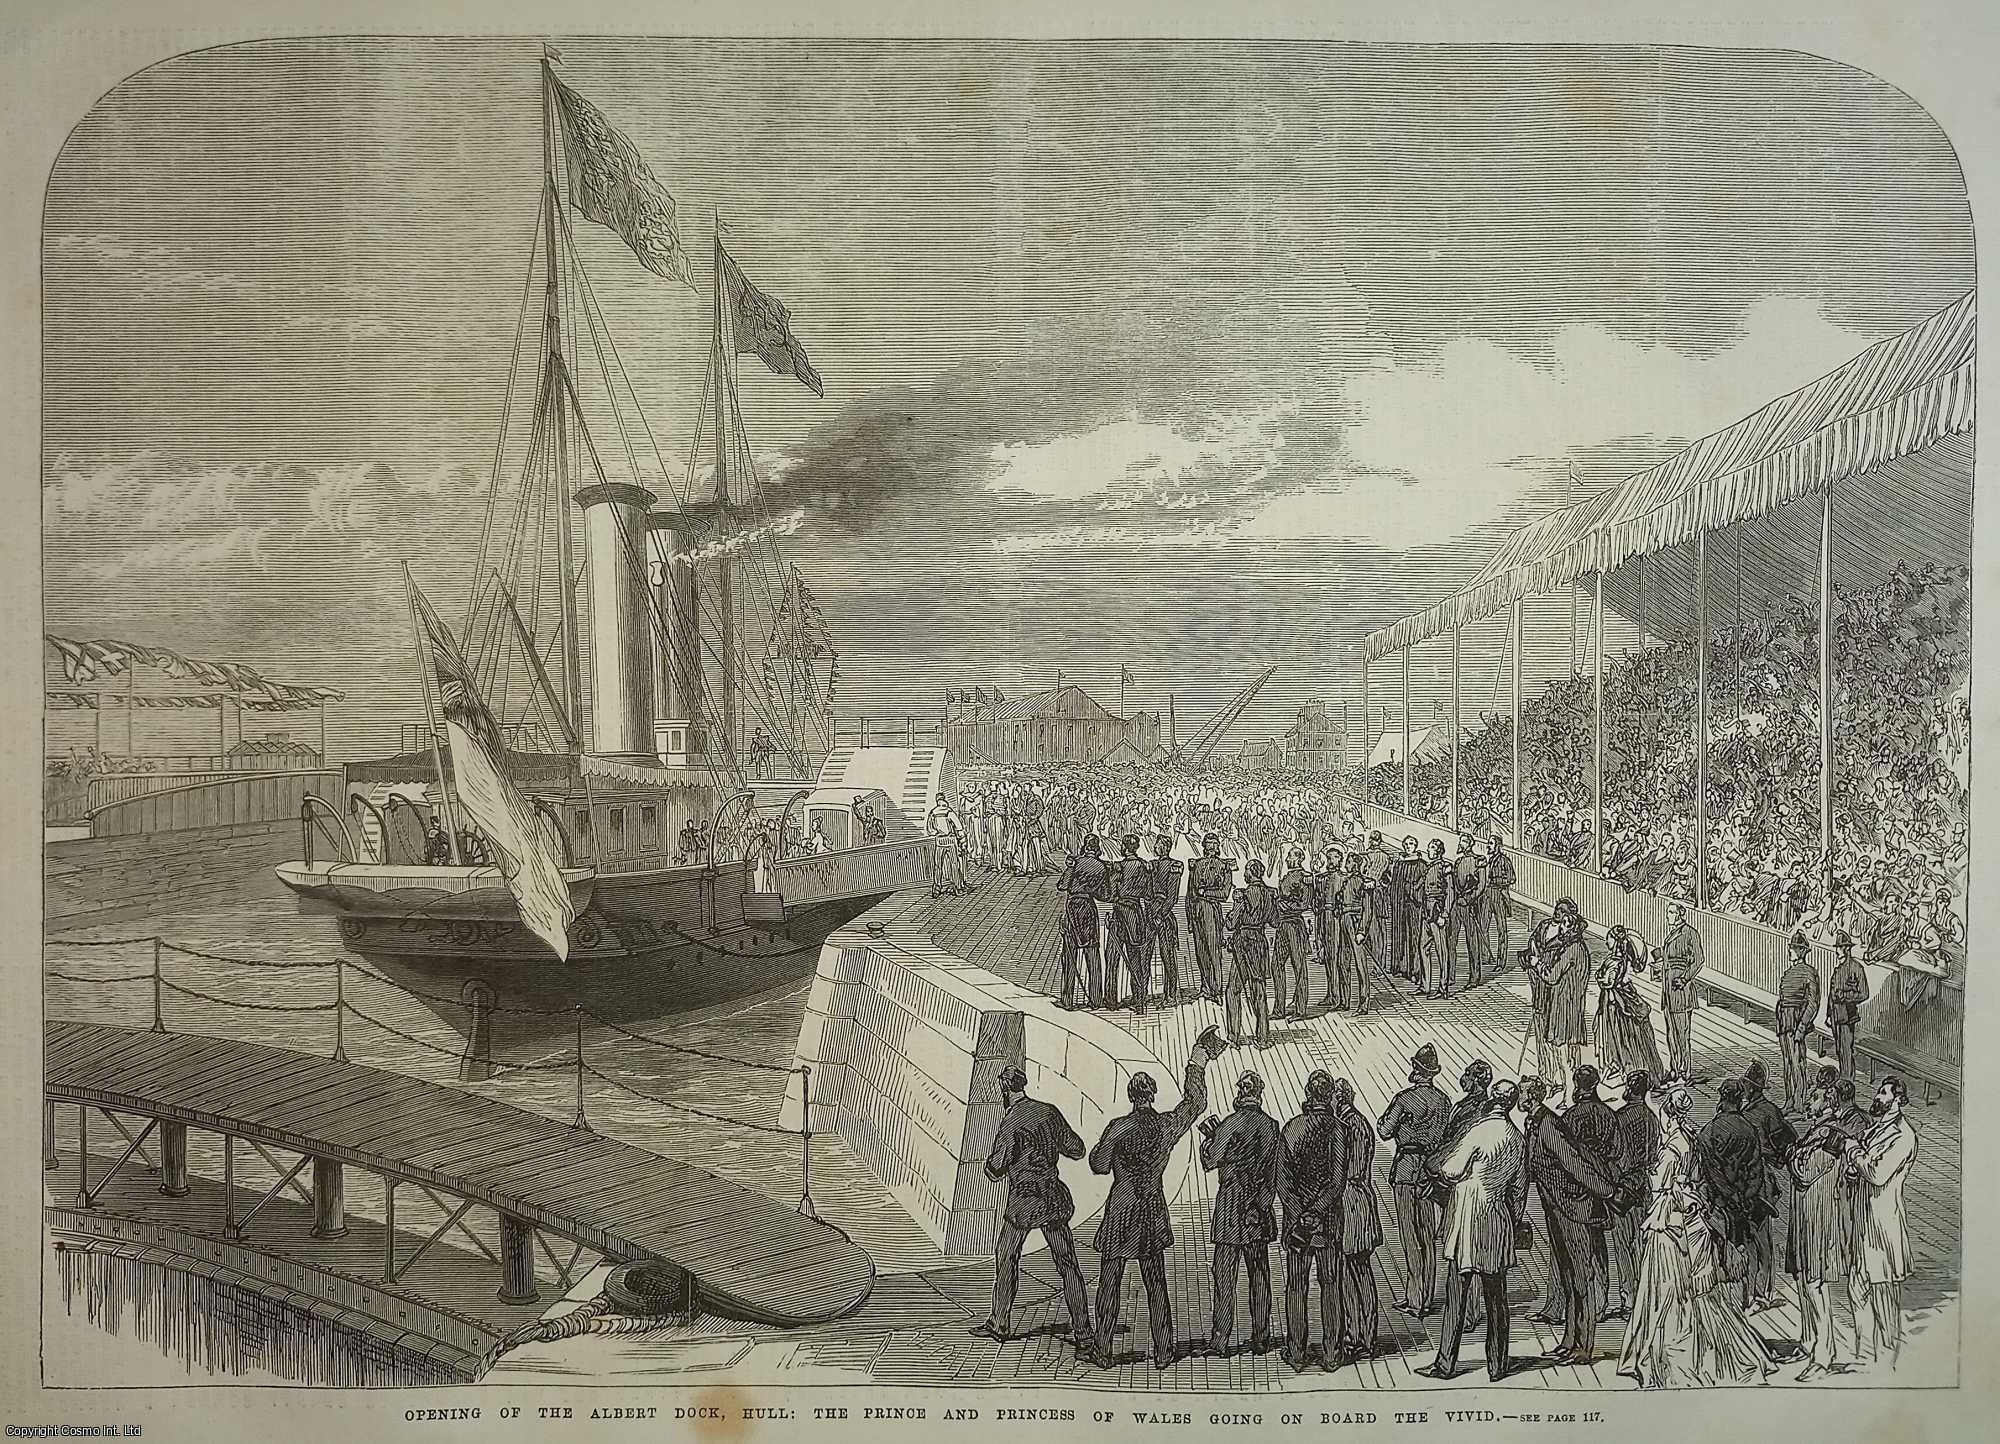 HULL - Opening of the Albert Dock, Hull: The Prince and Princess of wales Going on Board The Vivid. An original woodcut engraving from the Illustrated London News, 1869.